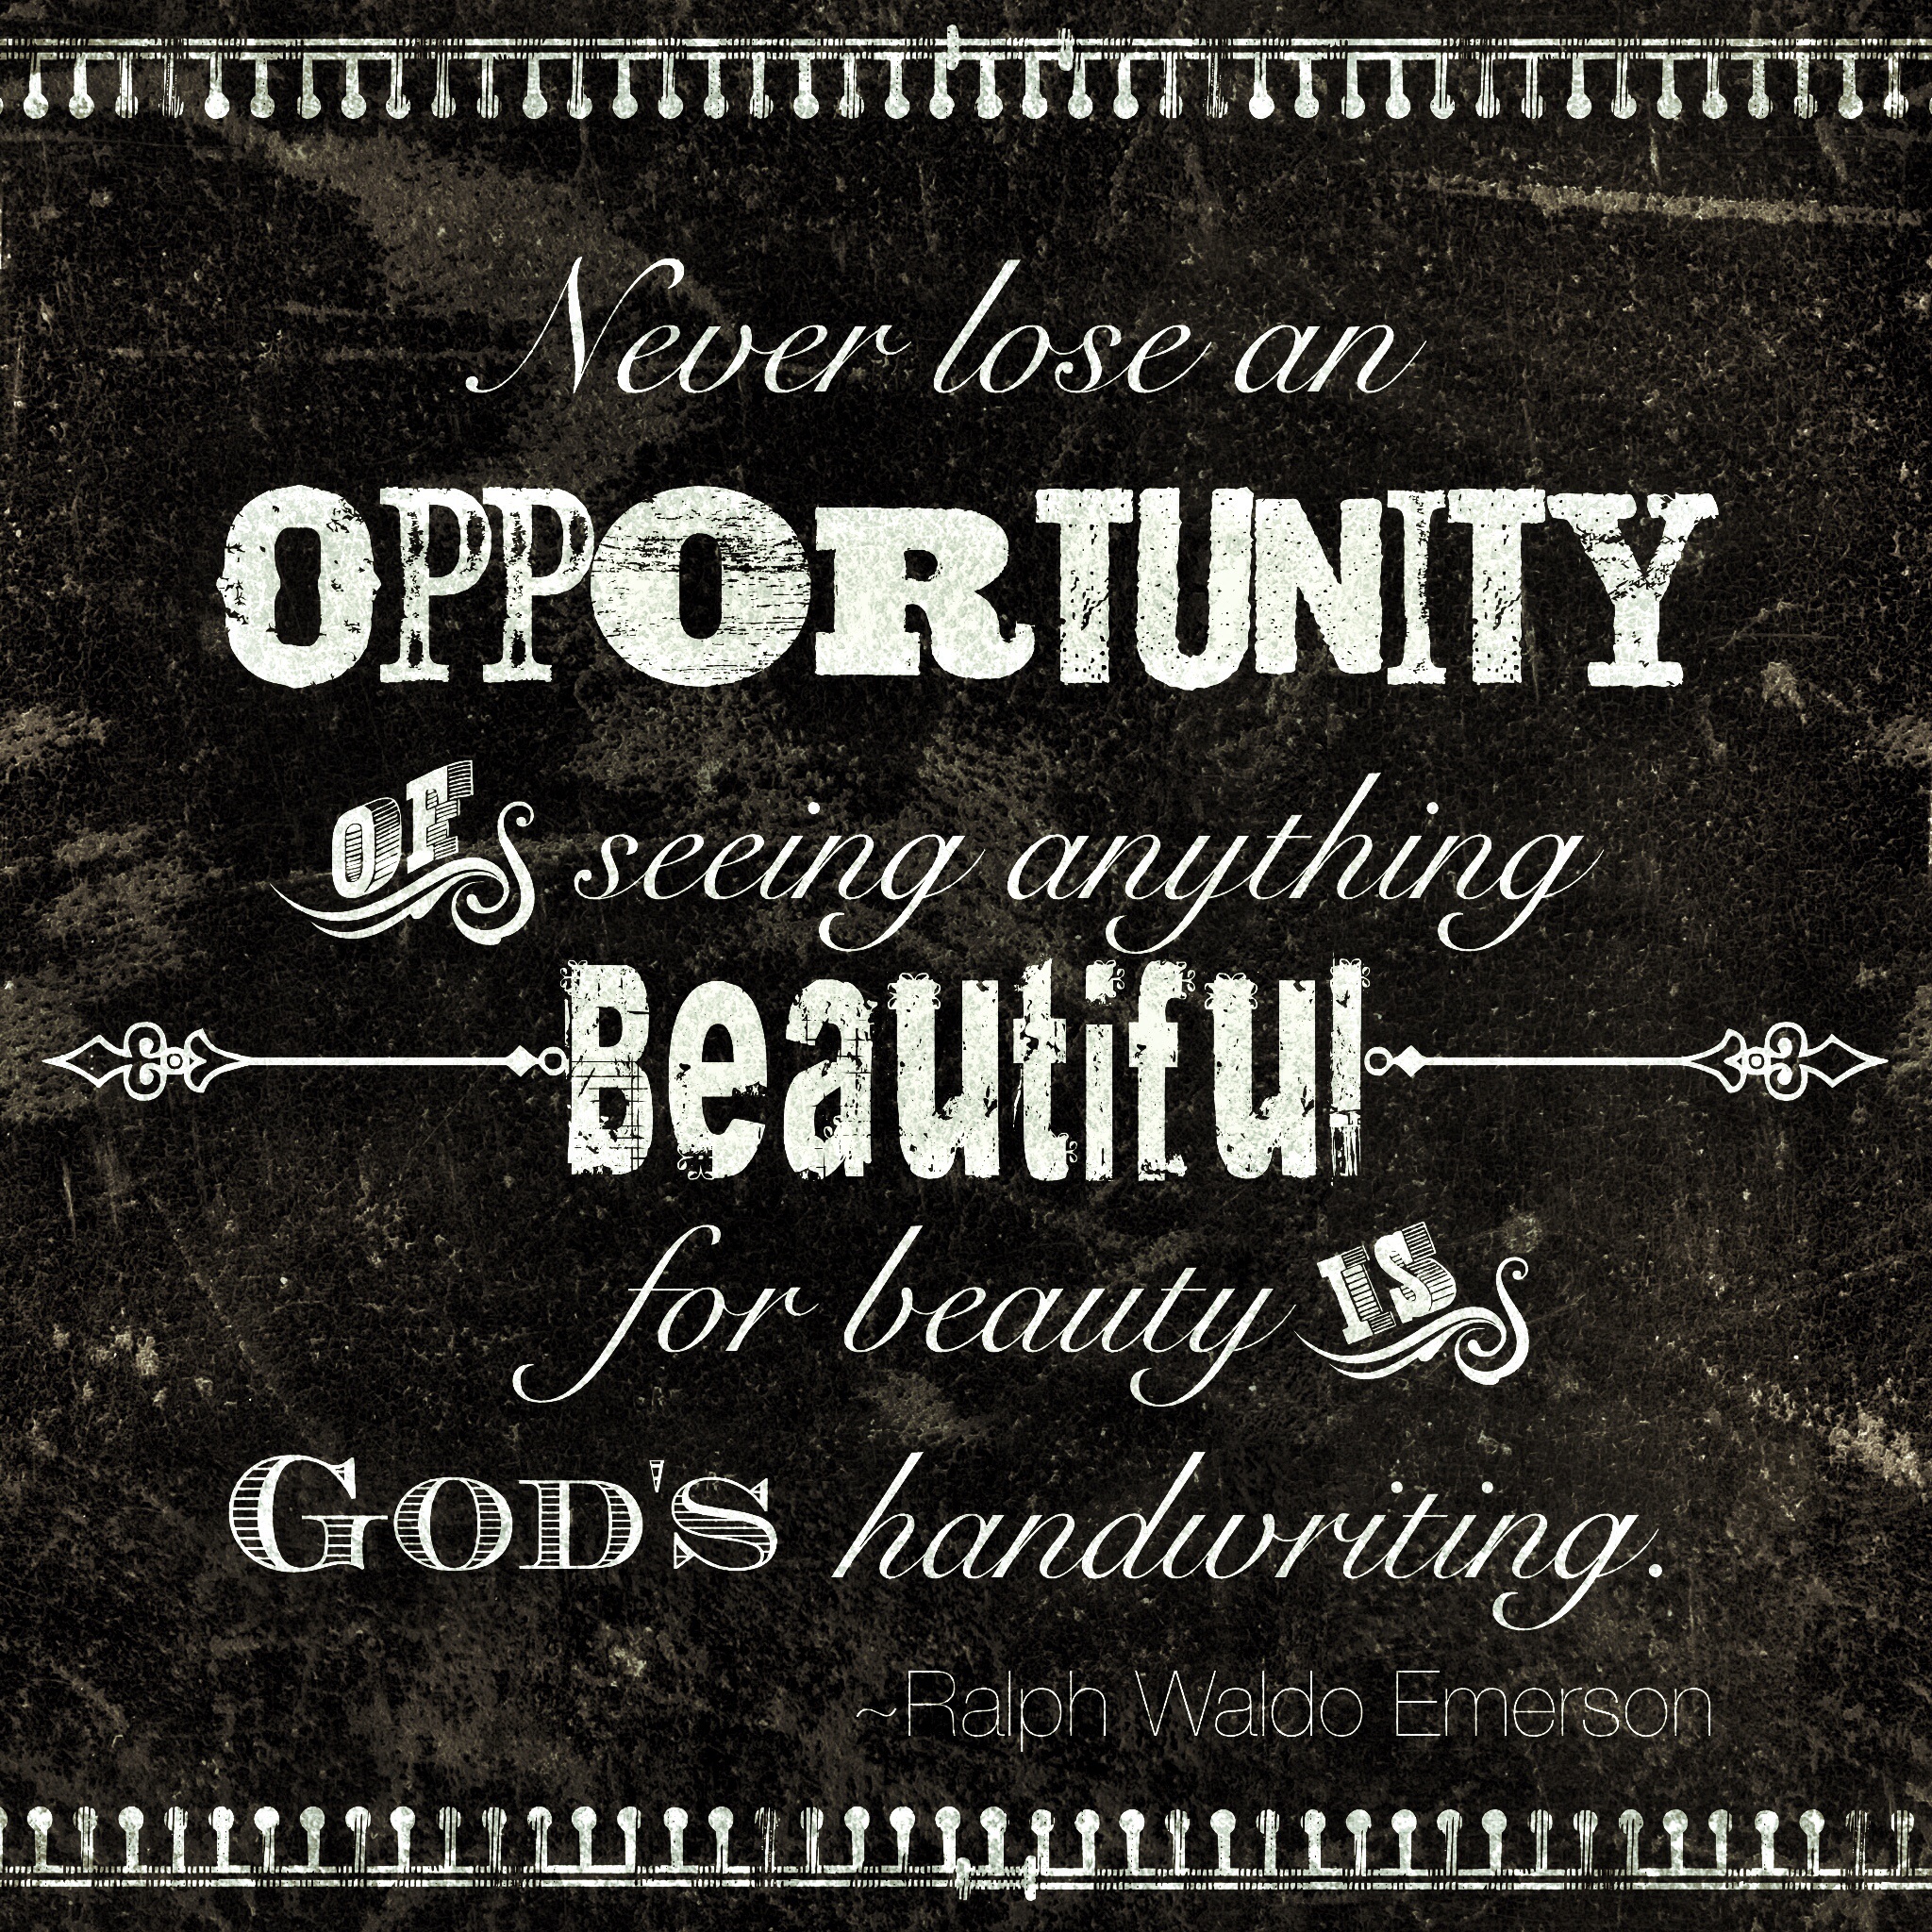 THREE LITTLE KITTENS BLOG | Opportunity | Ralph Waldo Emerson Quote about Opportunity, my OLW for 2014